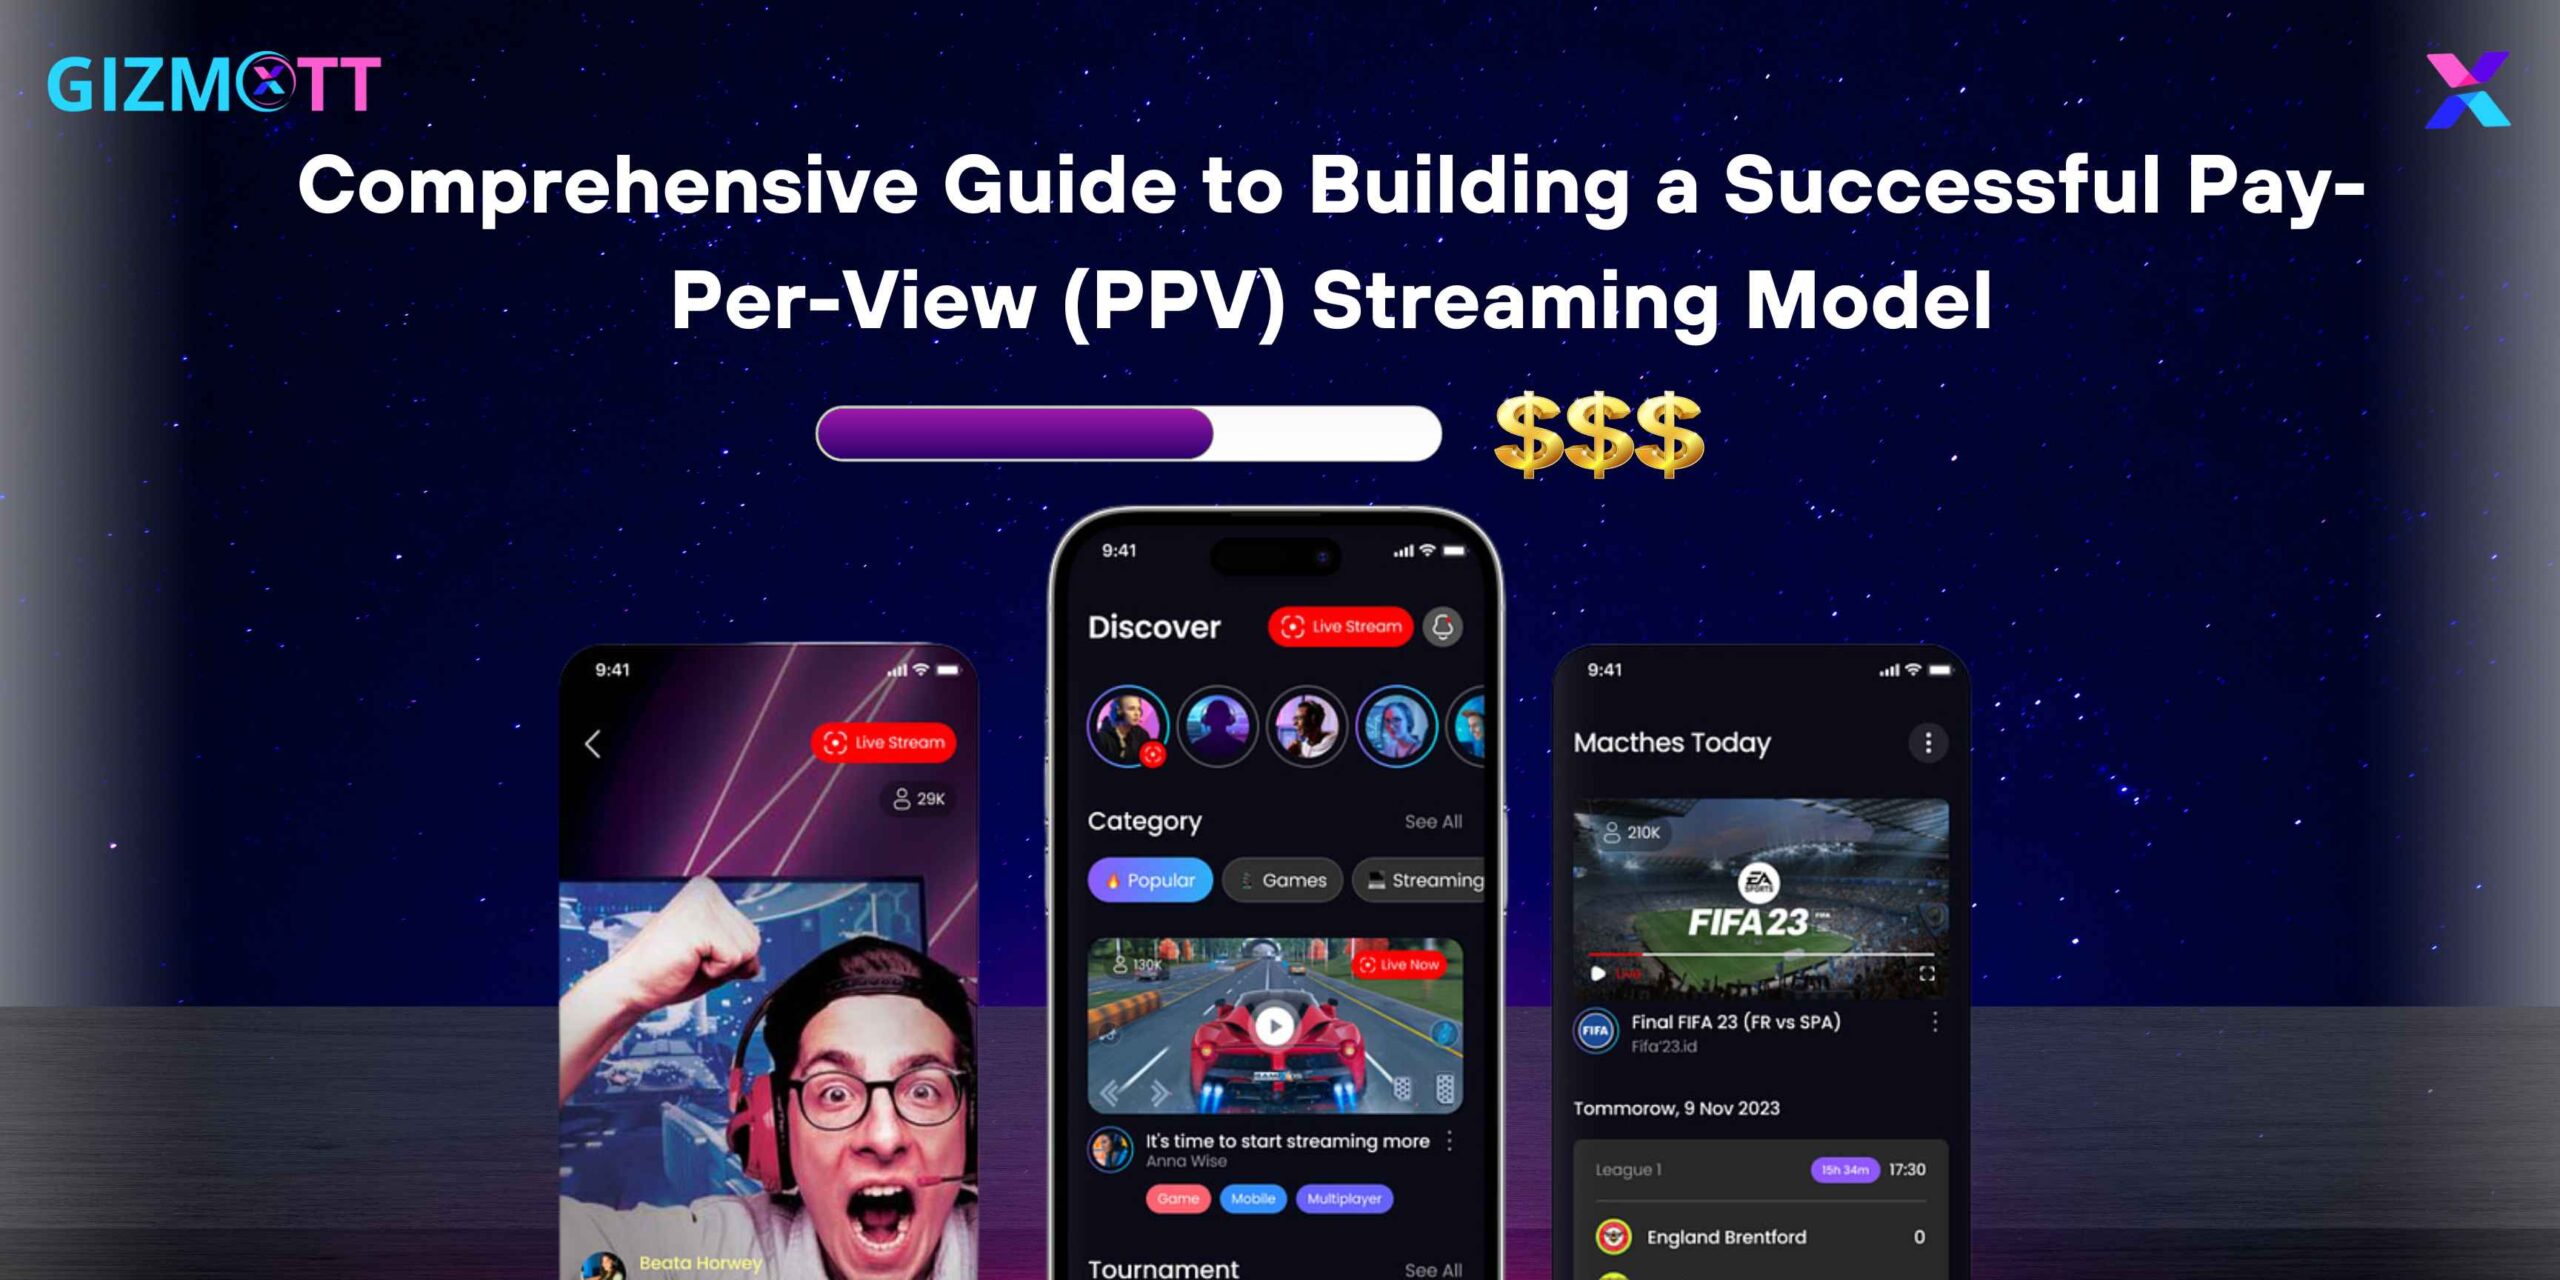 The Comprehensive Guide to Building a Successful Pay-Per-View (PPV) Streaming Model